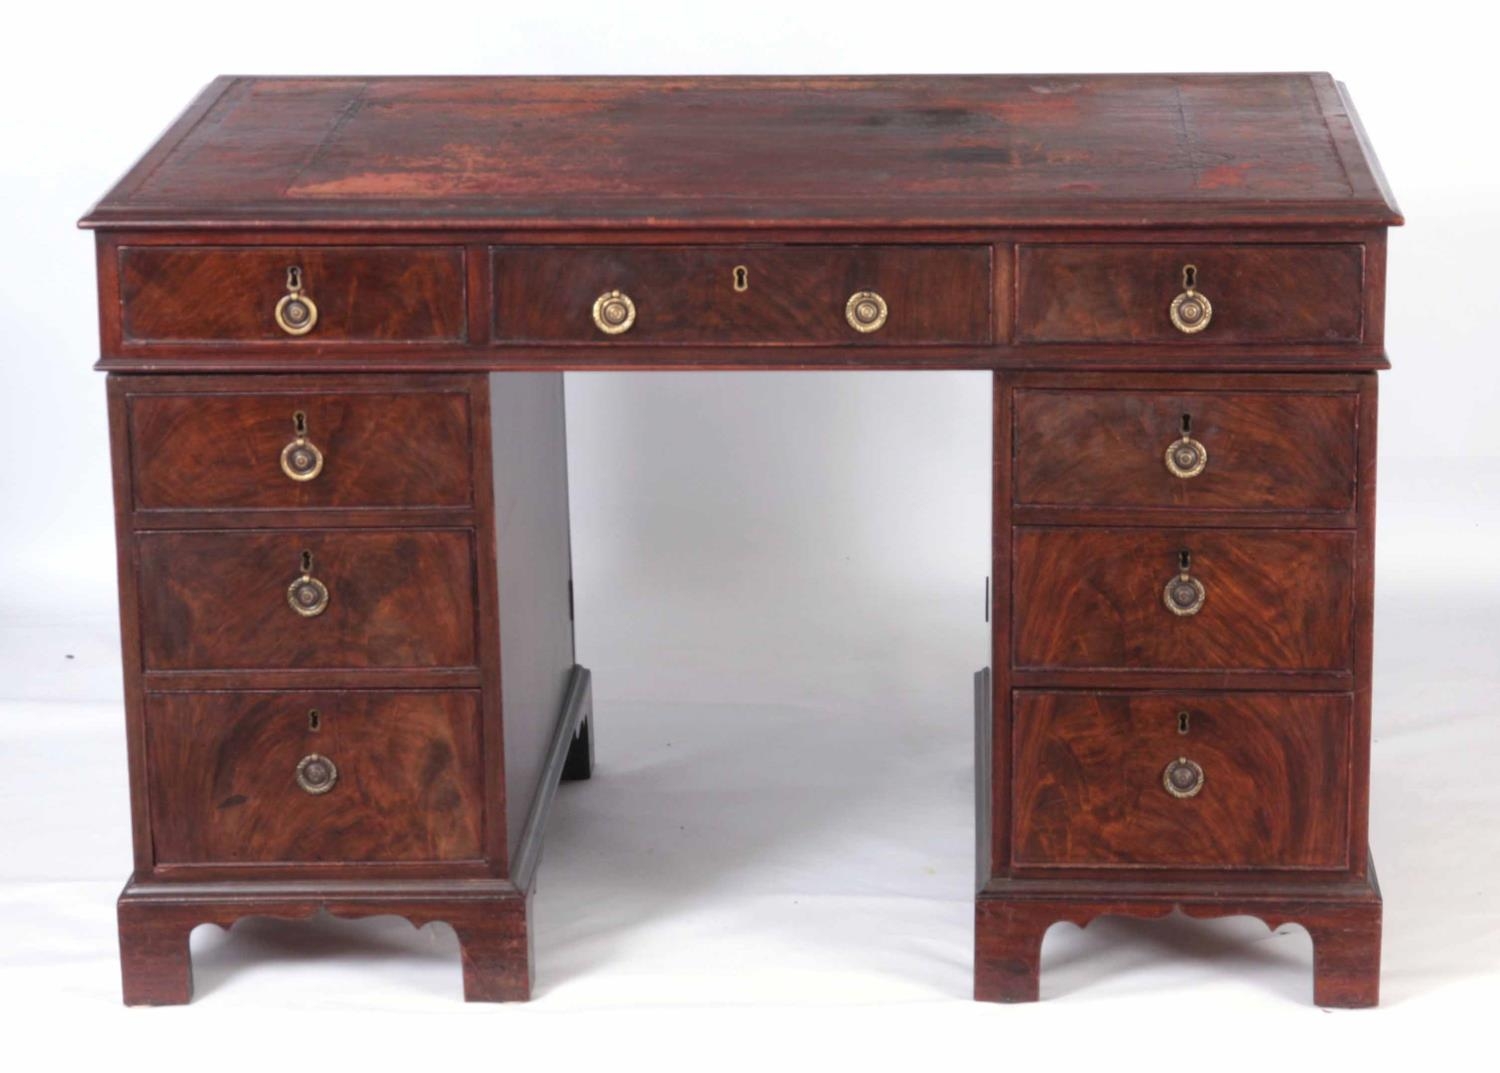 A Late Georgian Flamed Mahogany Partners Desk Of Small Size With